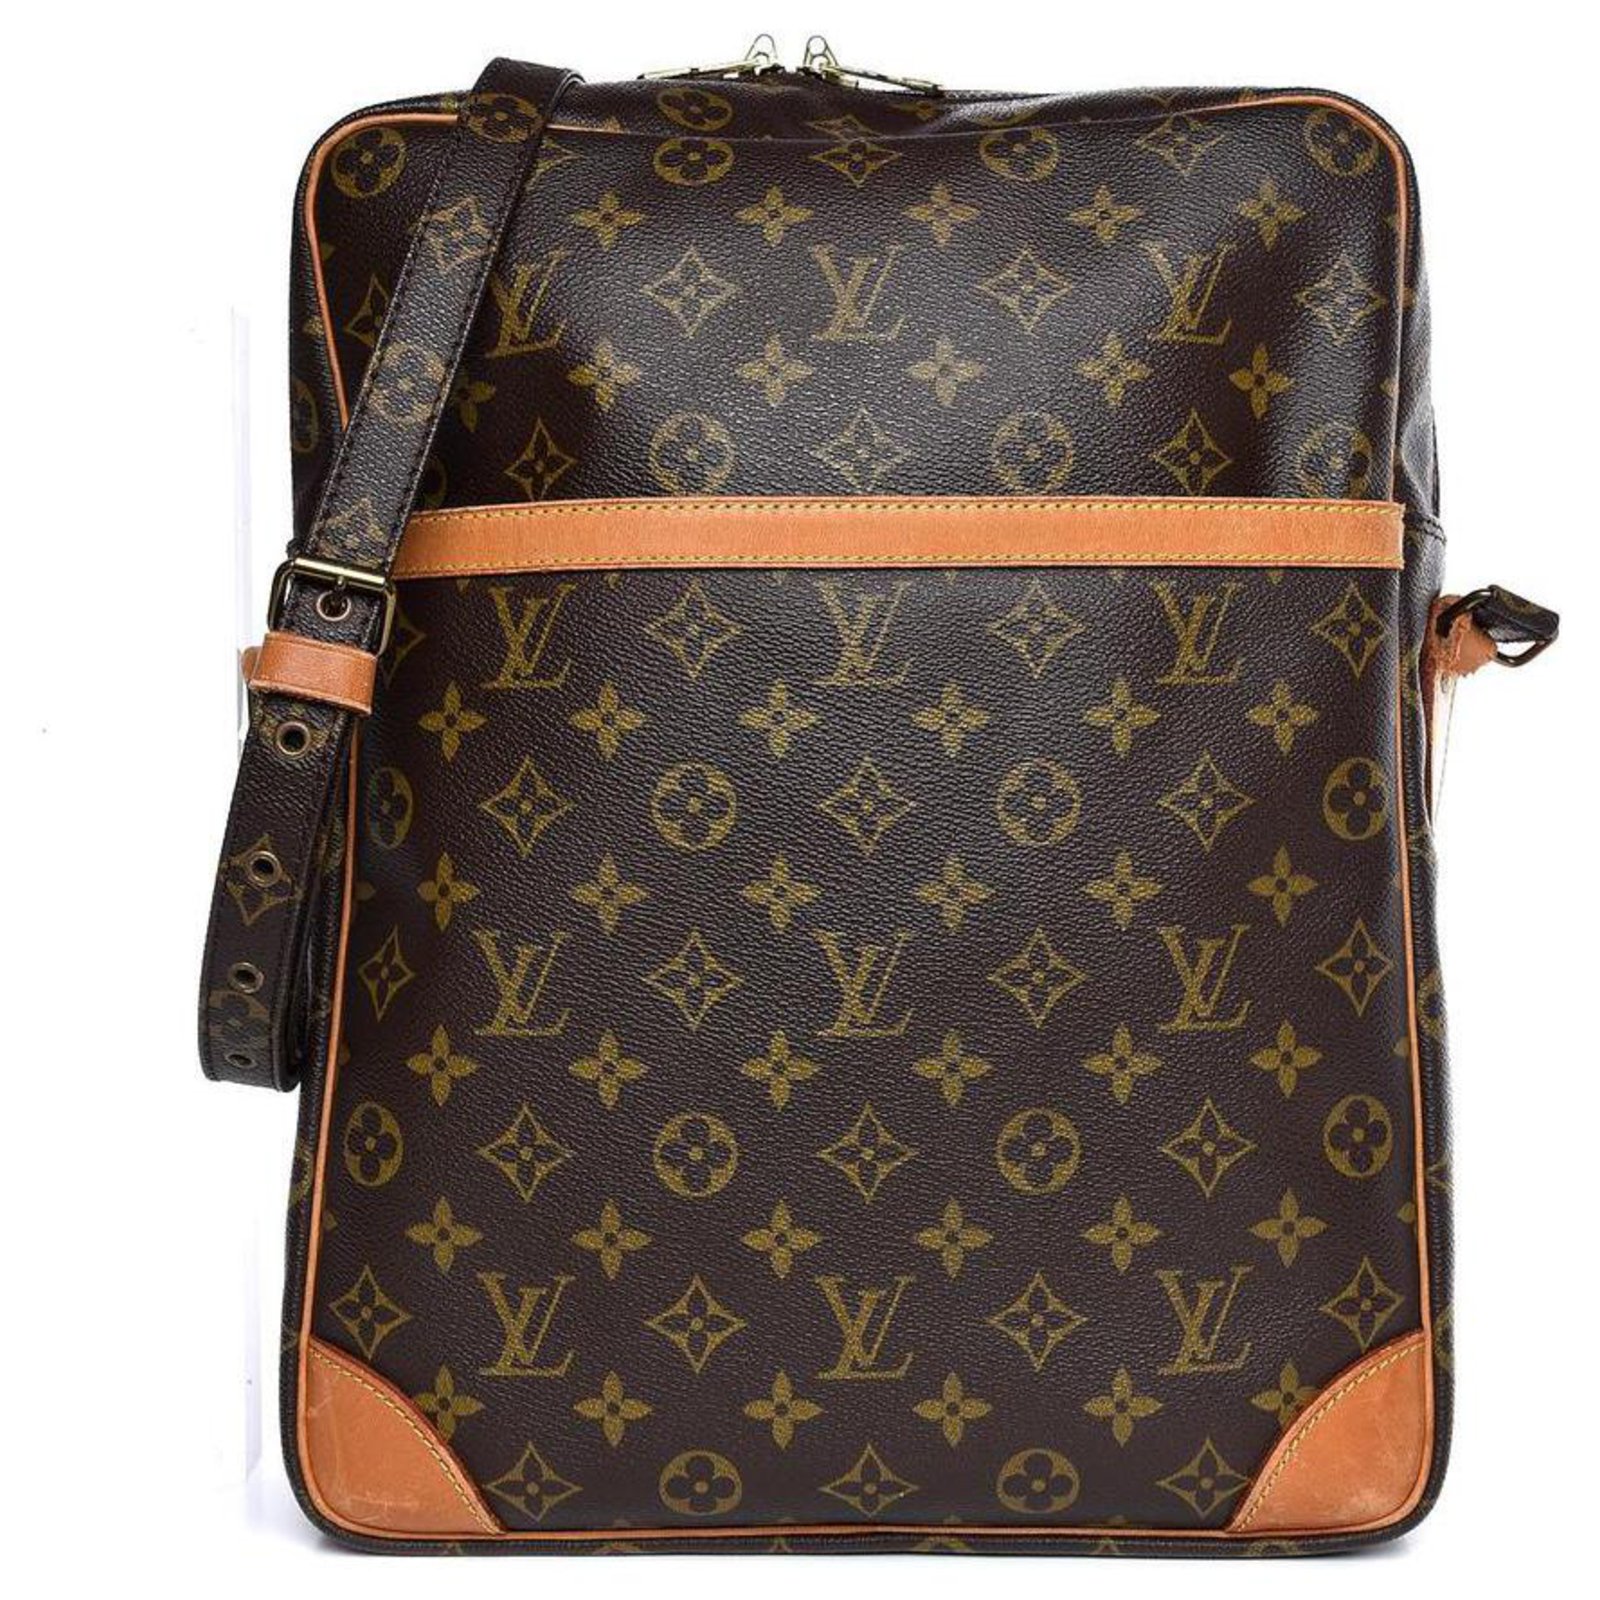 LOUIS VUITTON CROSSBODY BAG EXTRA LARGE PERFECT FOR LABTOP